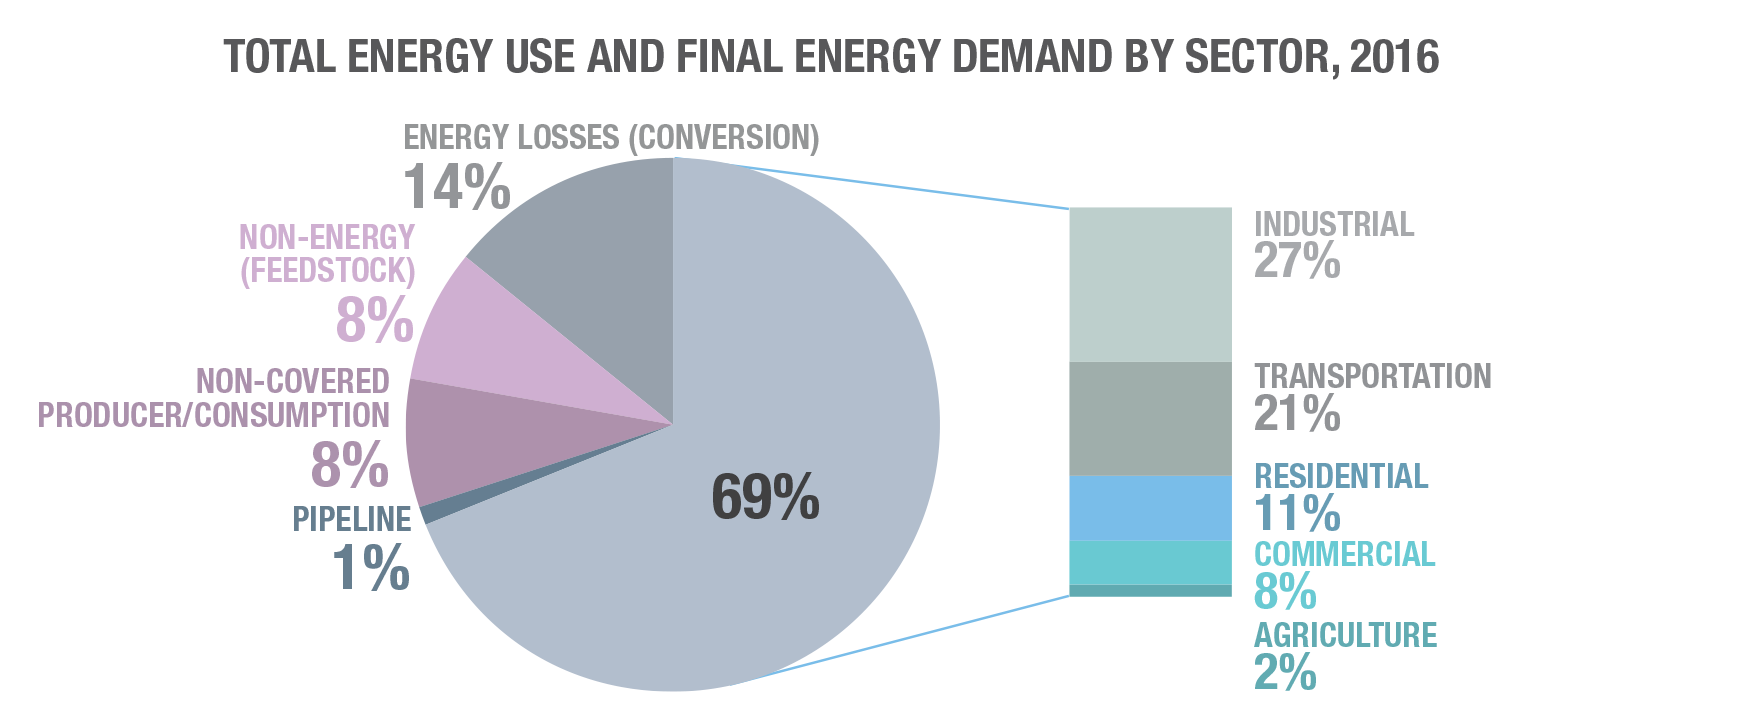 Total Energy Use and Final Energy Demand by Sector, 2016.